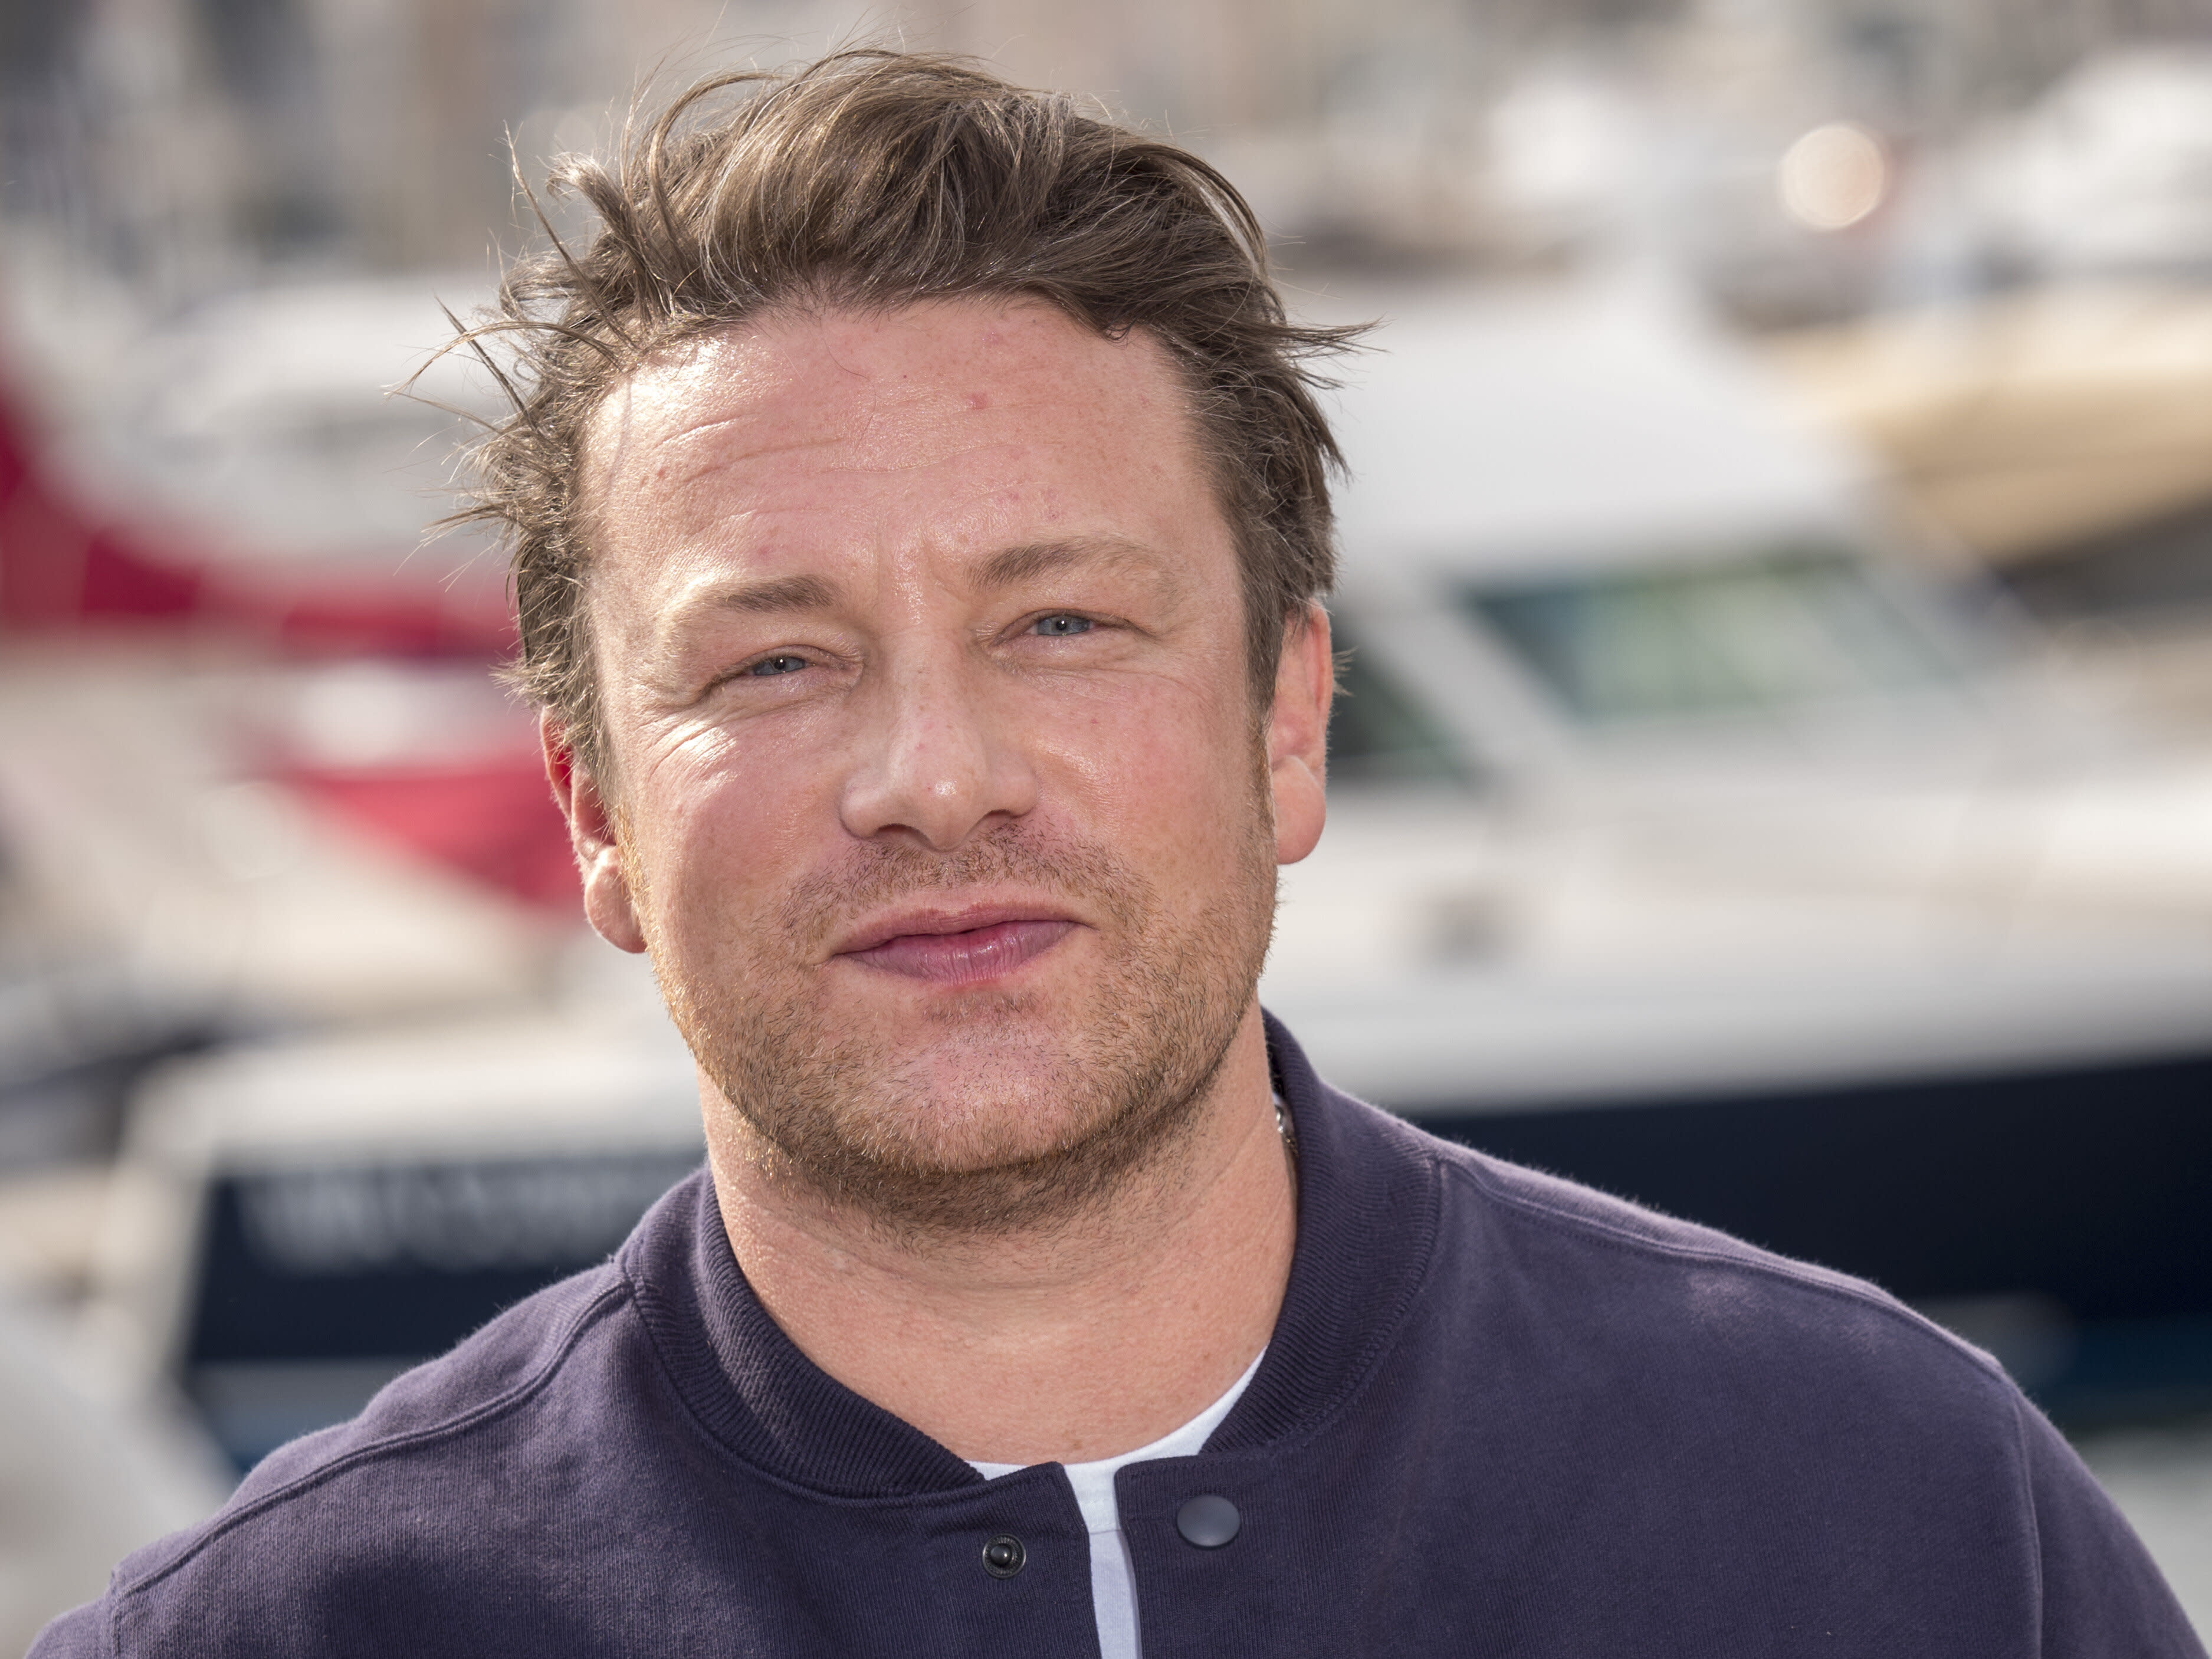 Chef Jamie Oliver In Hot Soup And Other Top Lifestyle News To Know